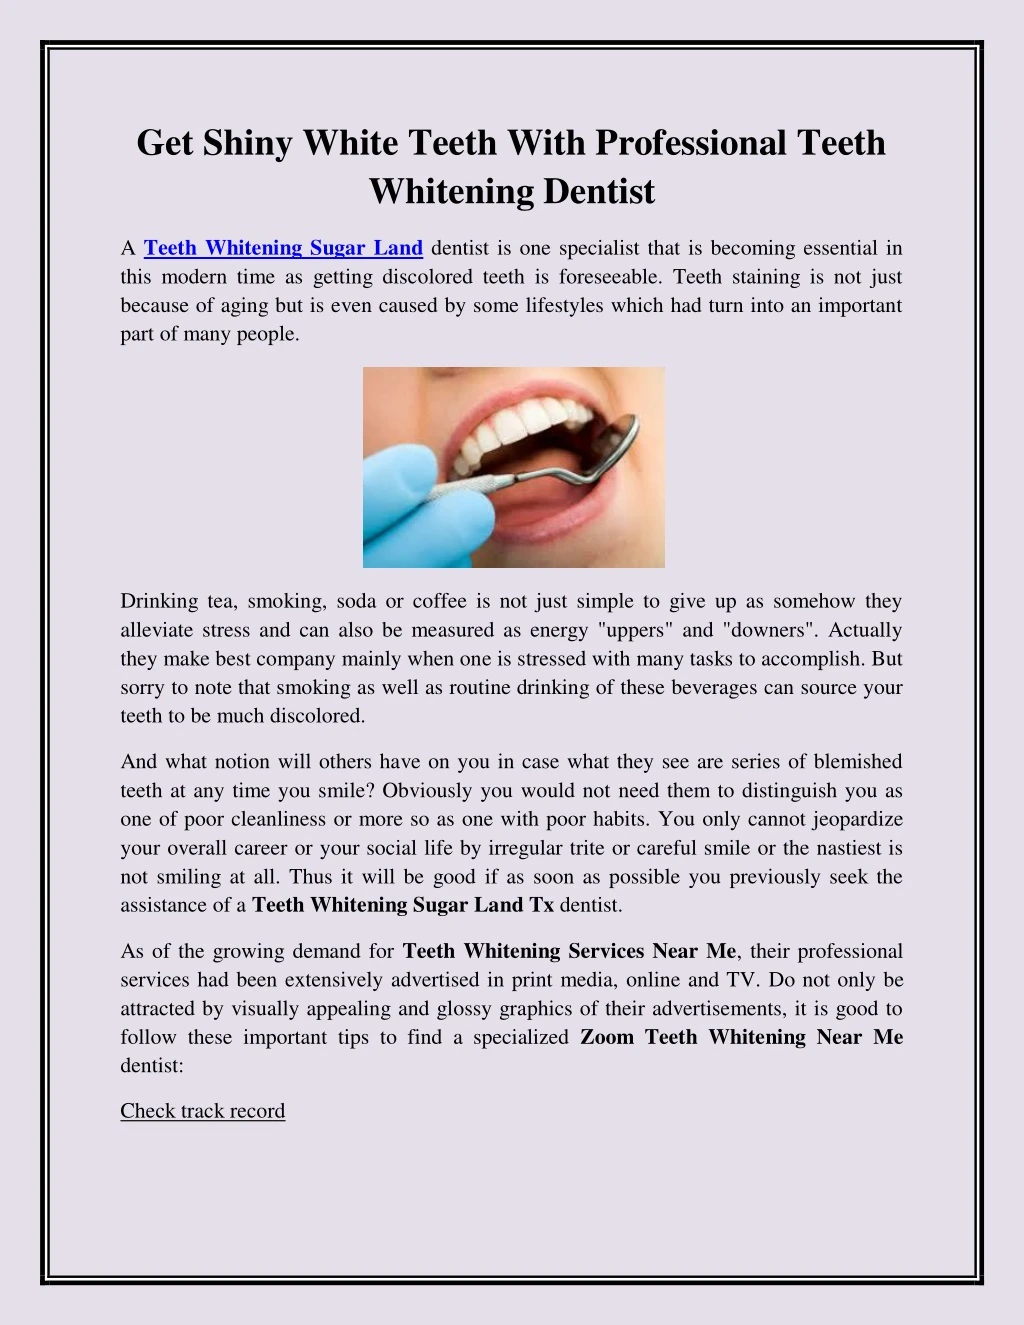 get shiny white teeth with professional teeth